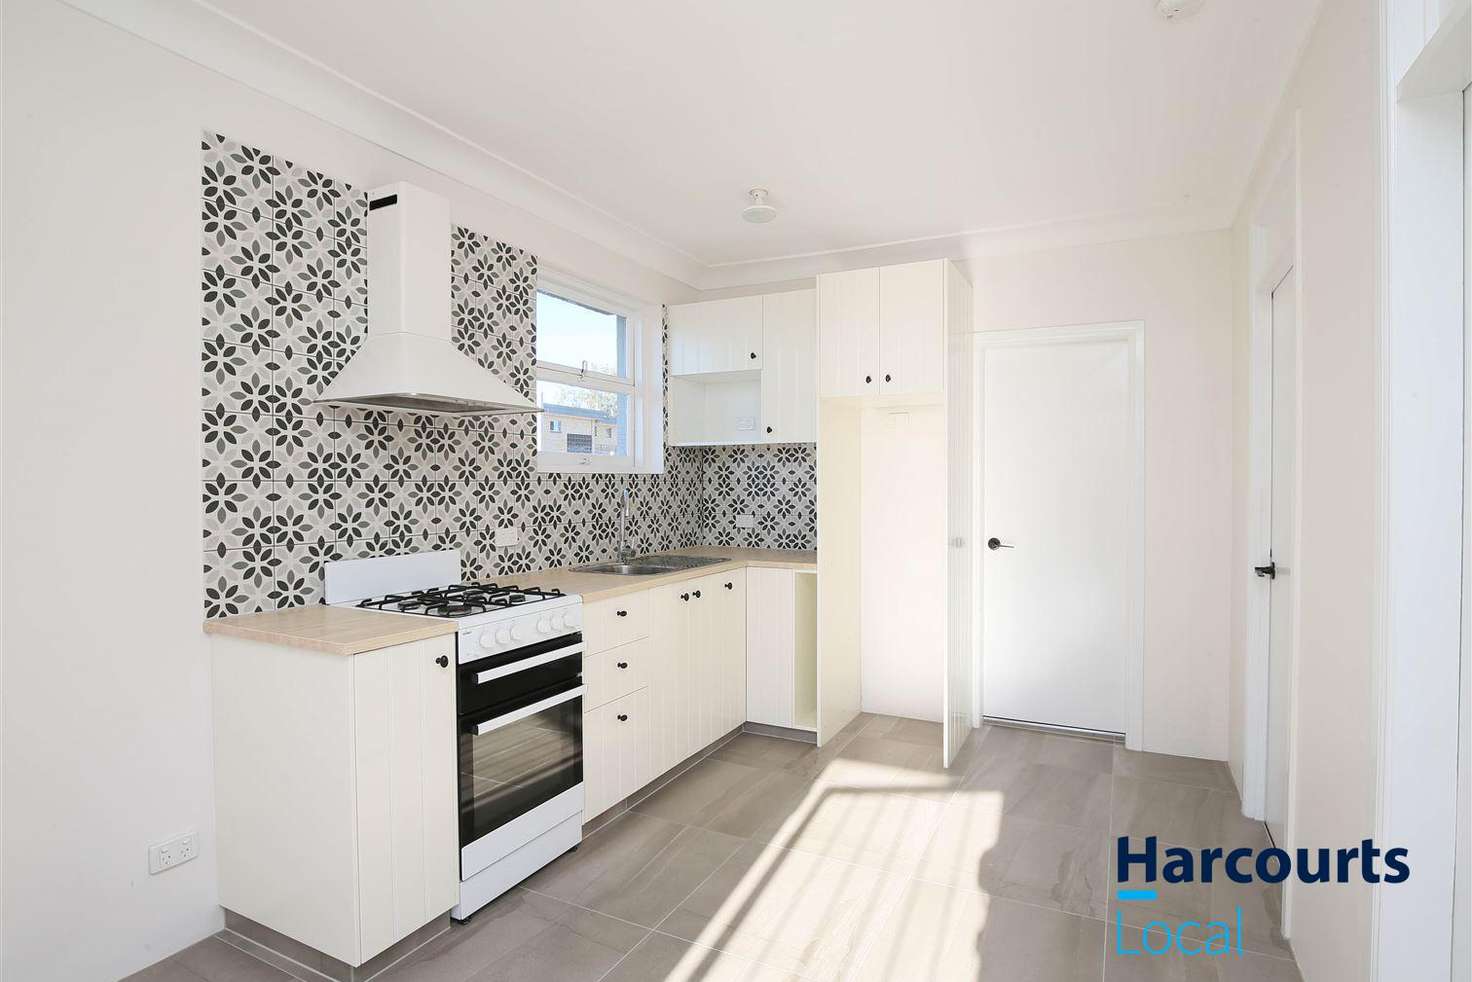 Main view of Homely unit listing, 15/191 Harcourt Street, New Farm QLD 4005